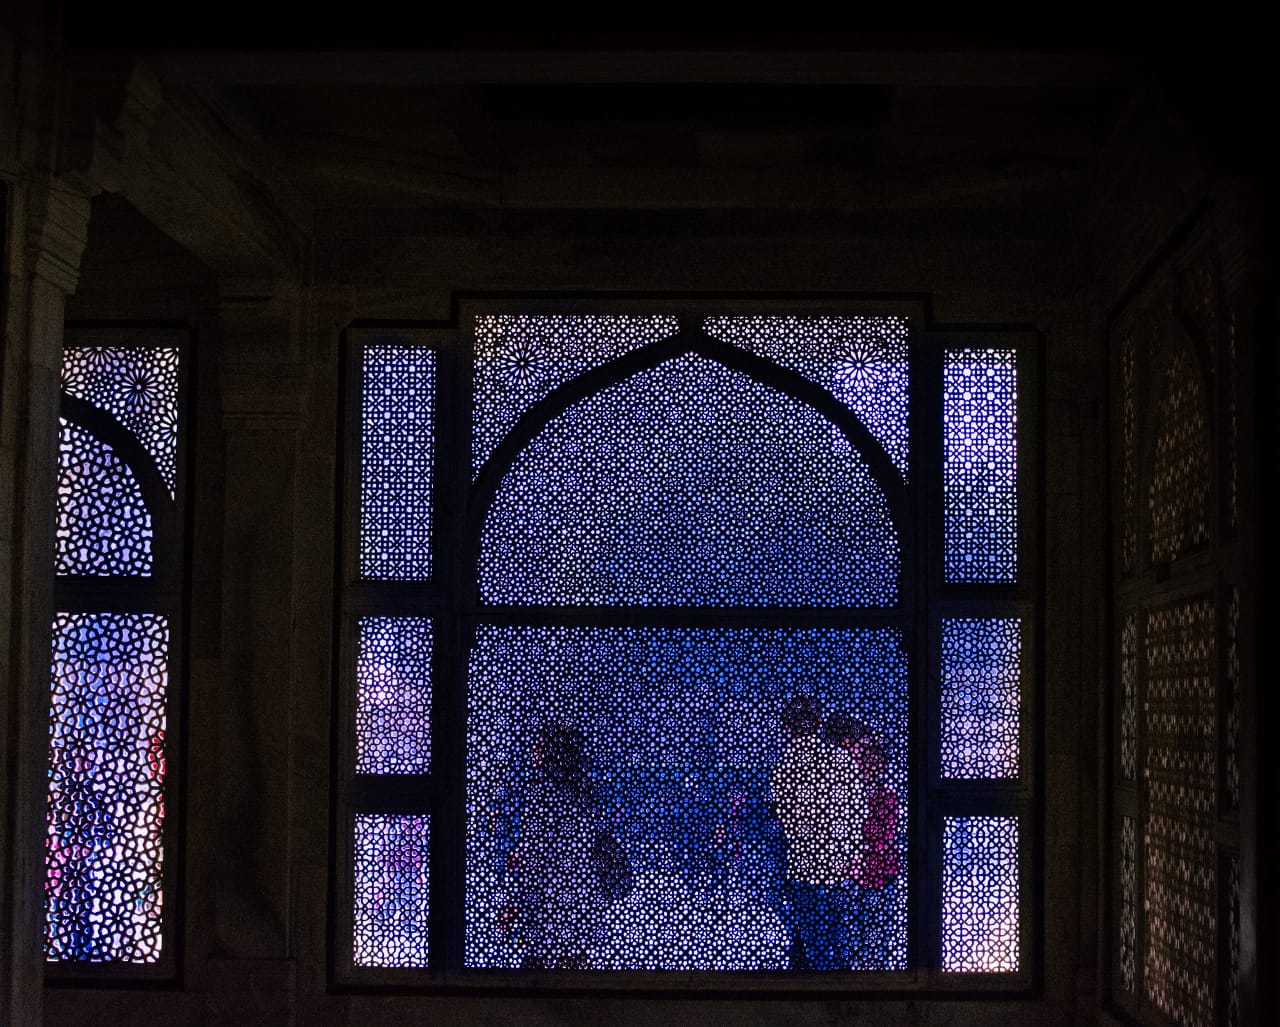 II The blending mood of colour is revealed by thelocalfeet's imagination through the decorative lattice window II